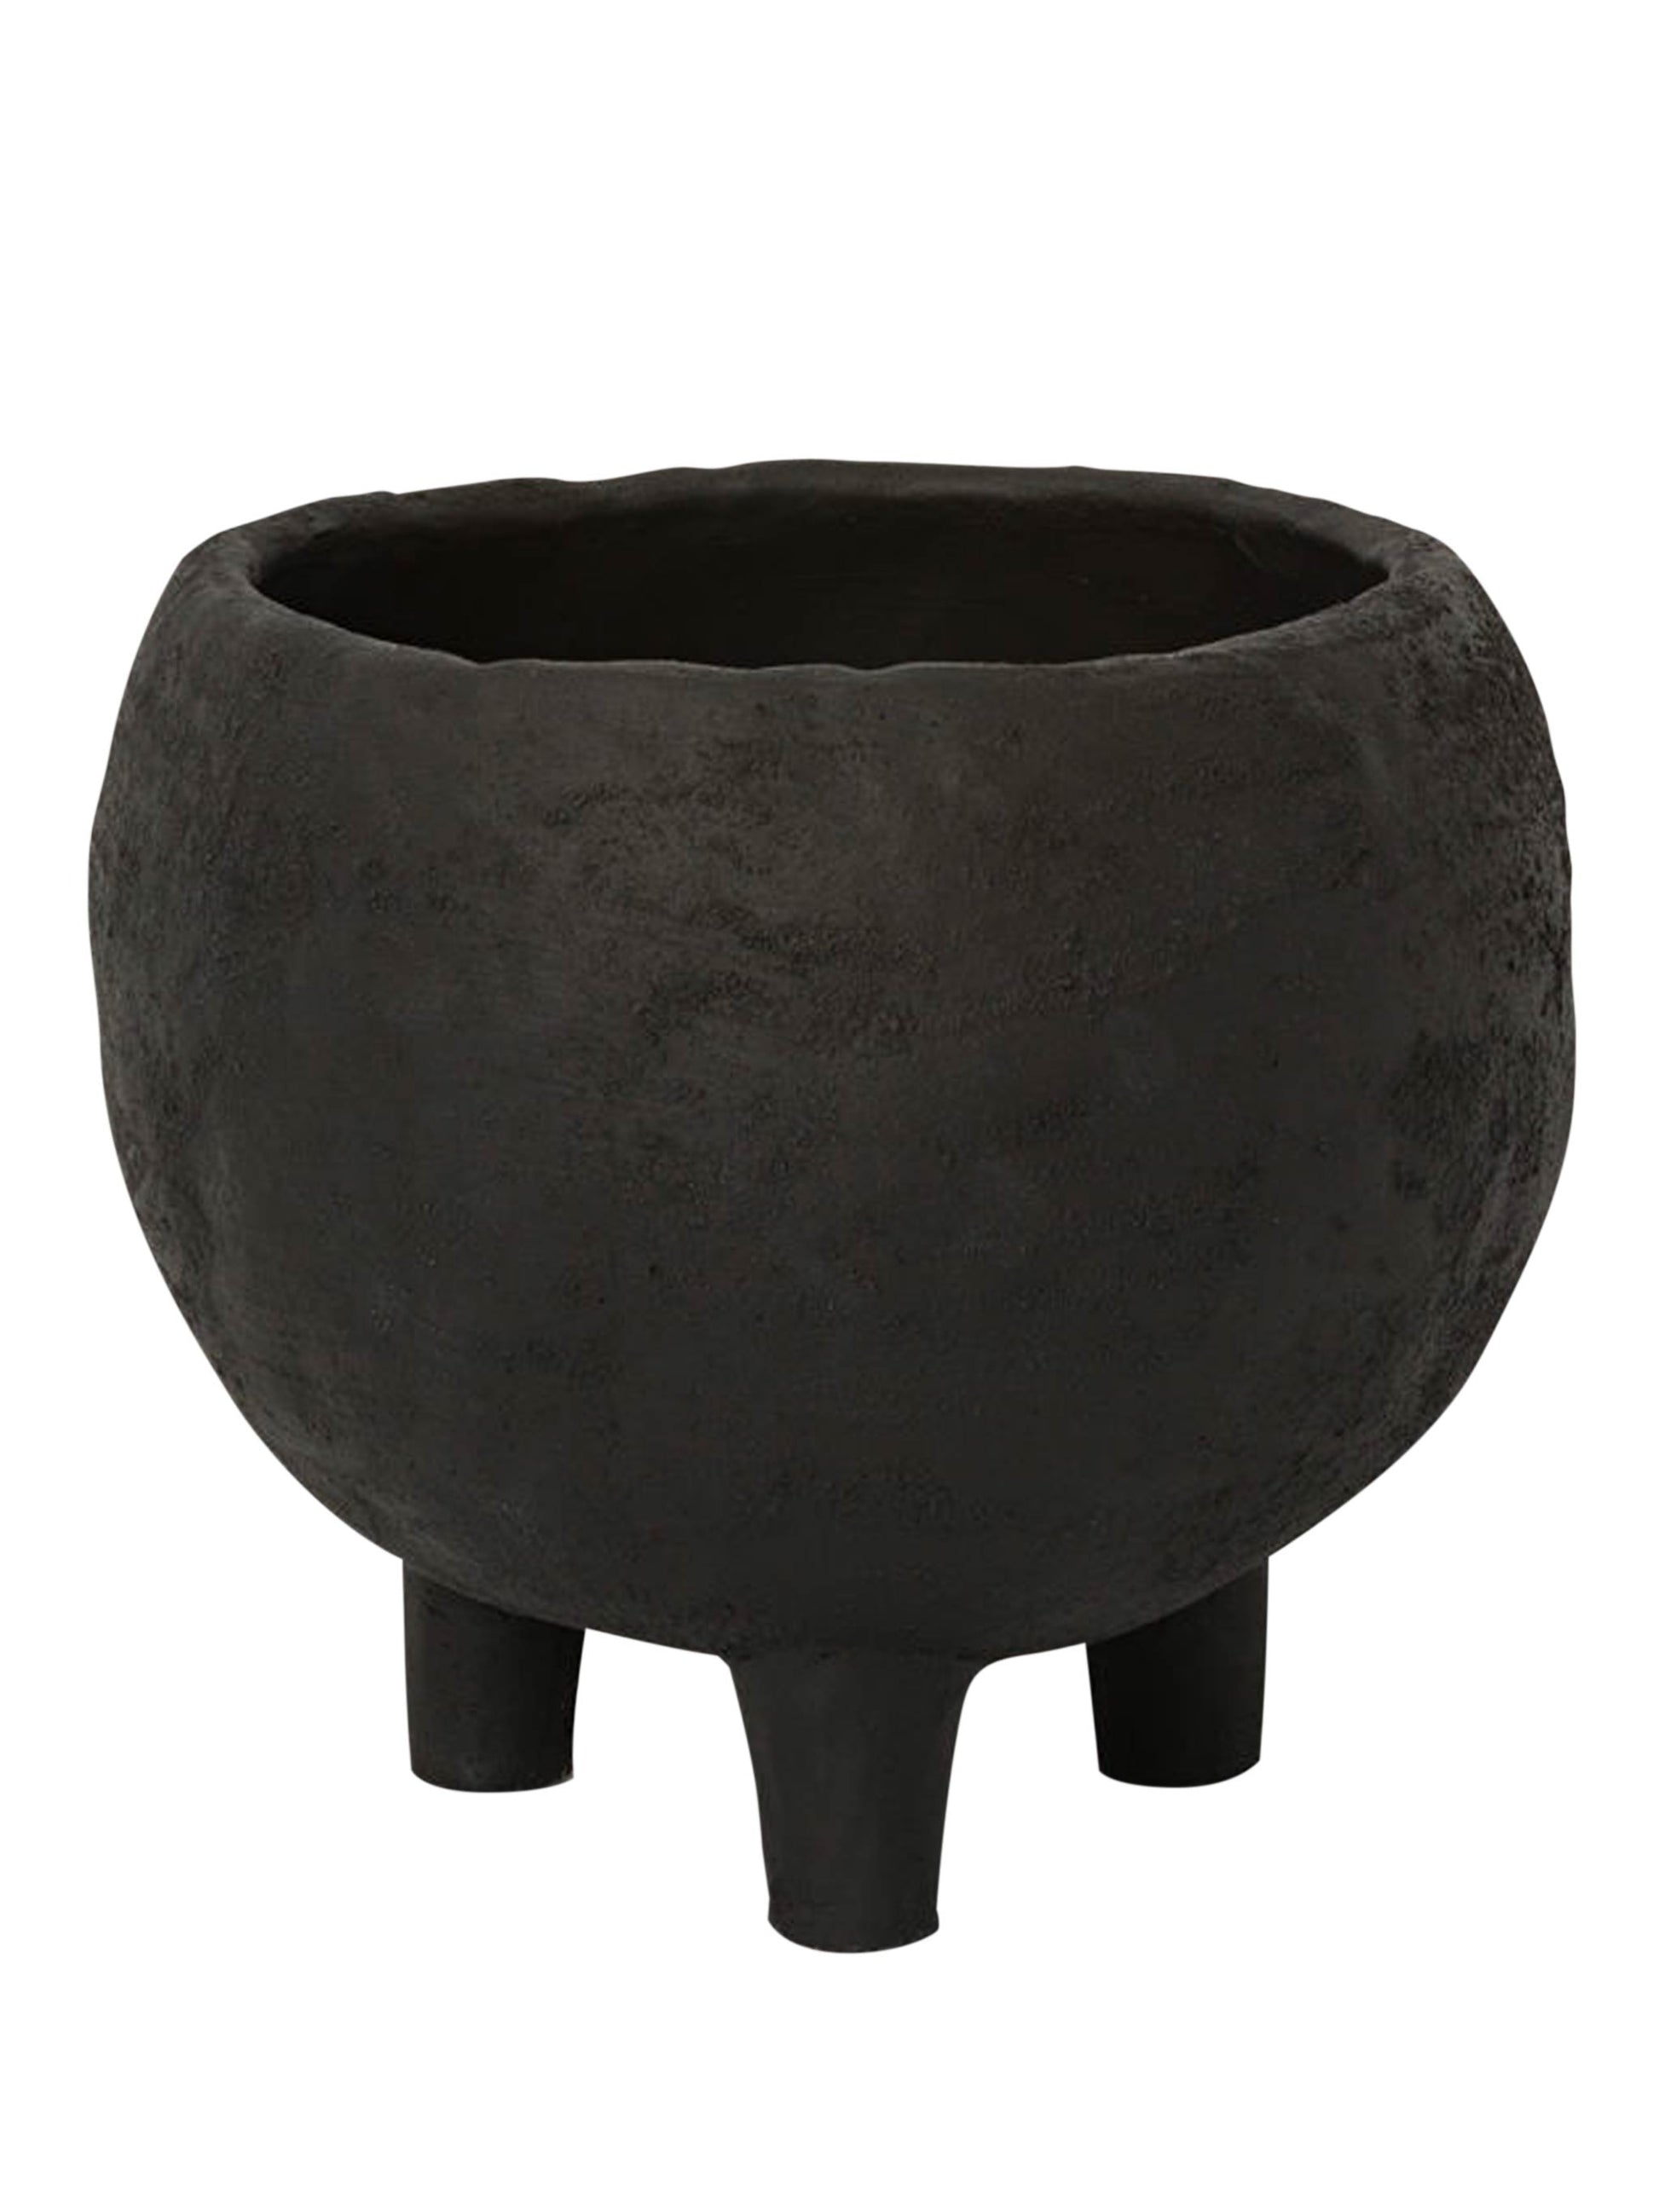 Niro Short Black Dome Pot with Standing Legs – Large